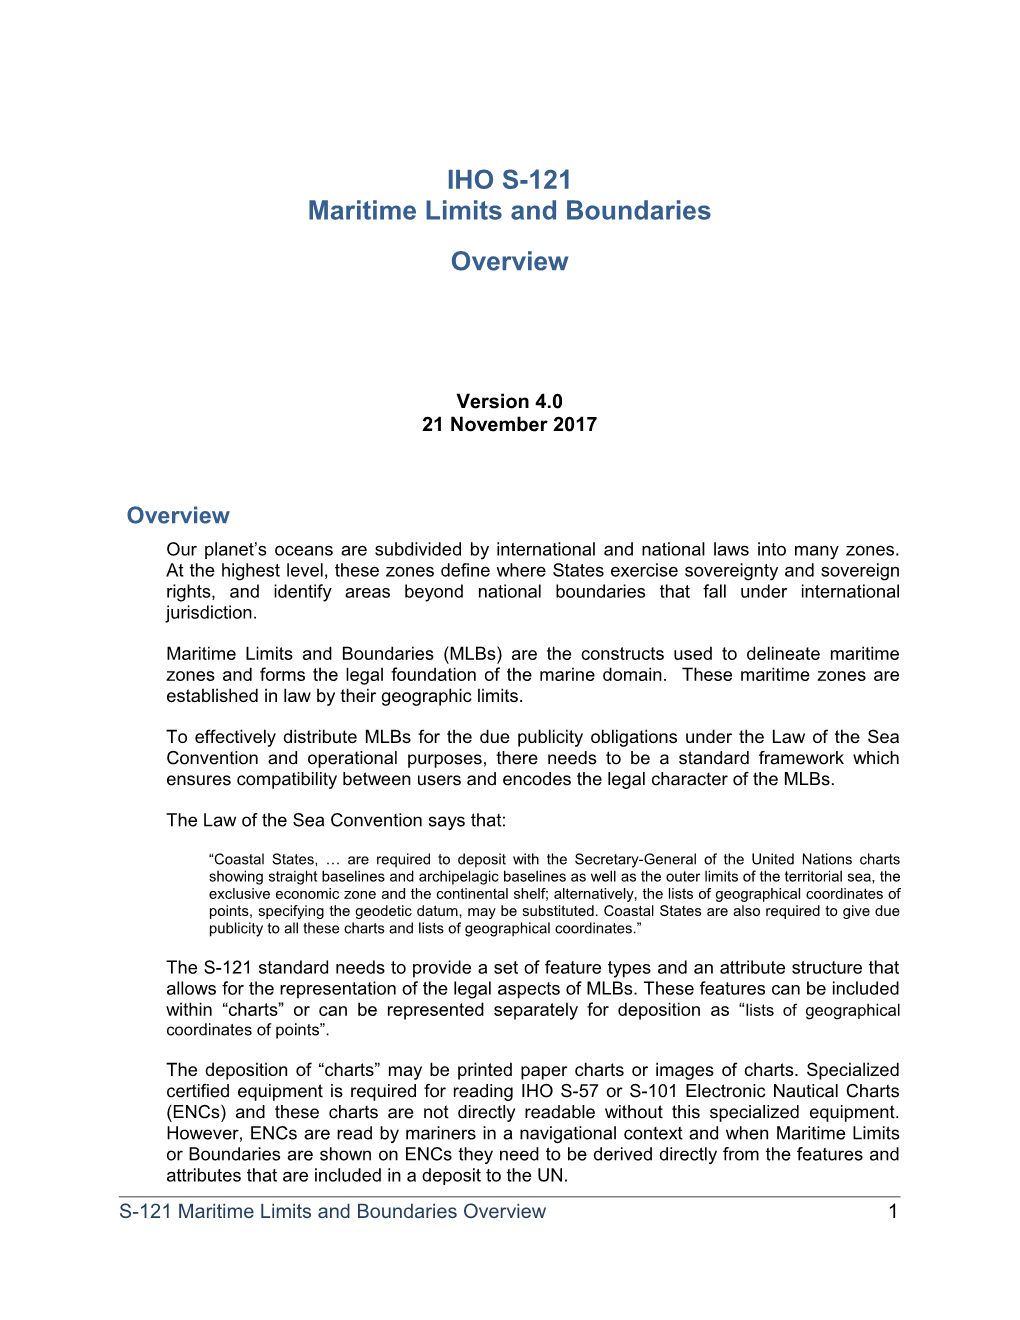 IHO S-121 Maritime Limits and Boundaries Overview